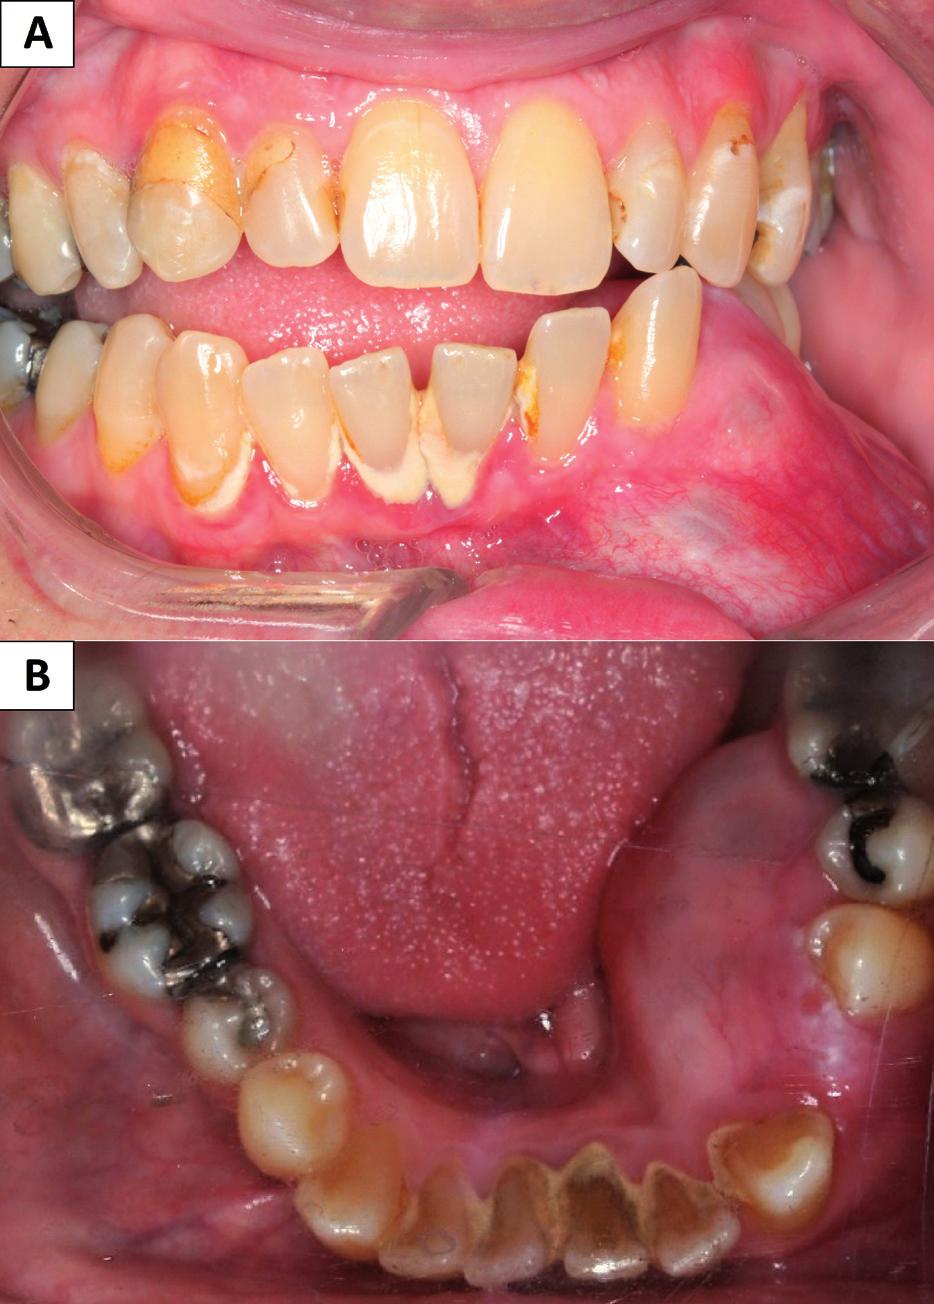 Histologically, GOC may have features overlapping with botryoid odontogenic cyst, dentigerous cyst, and low-grade mucoepidermoid carcinoma (2,8), but not with ameloblastoma.